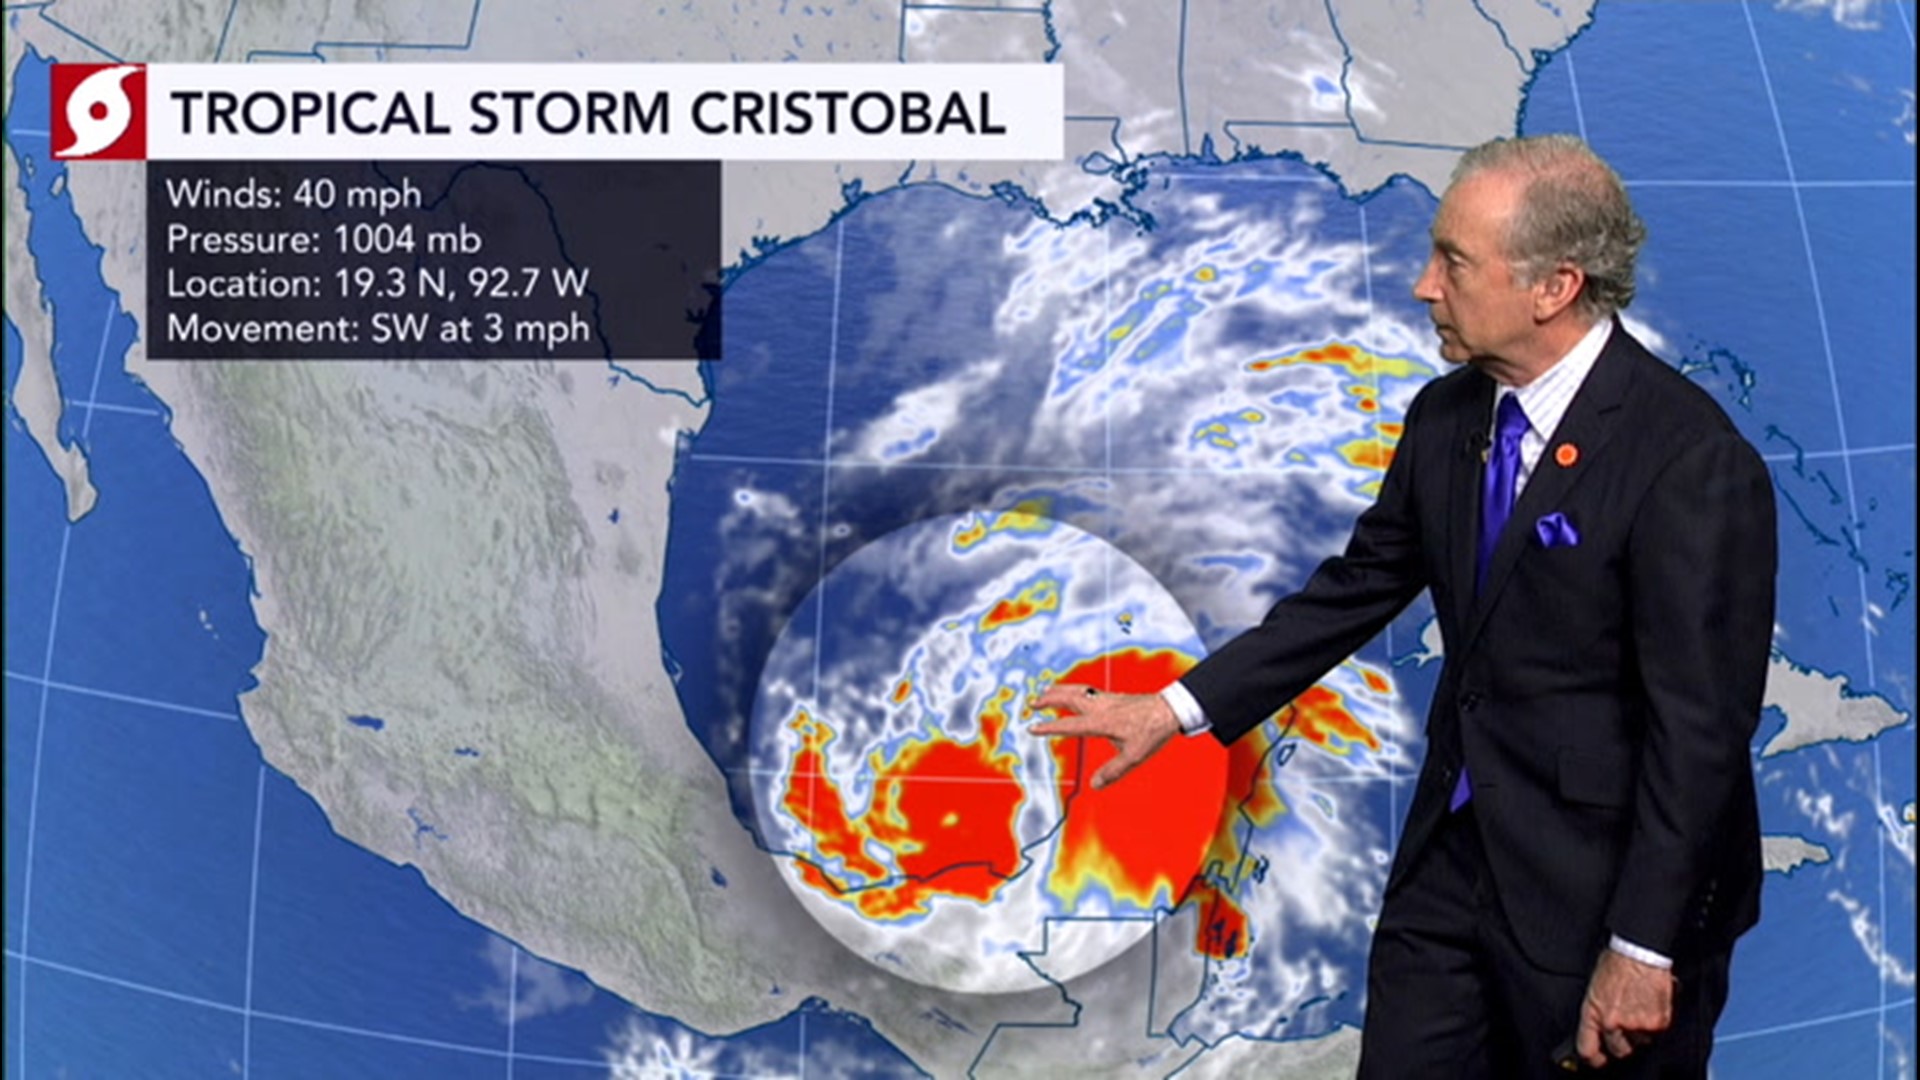 Cristobal will continue to drench parts of Mexico before it eventually heads for the United States' Gulf Coast.